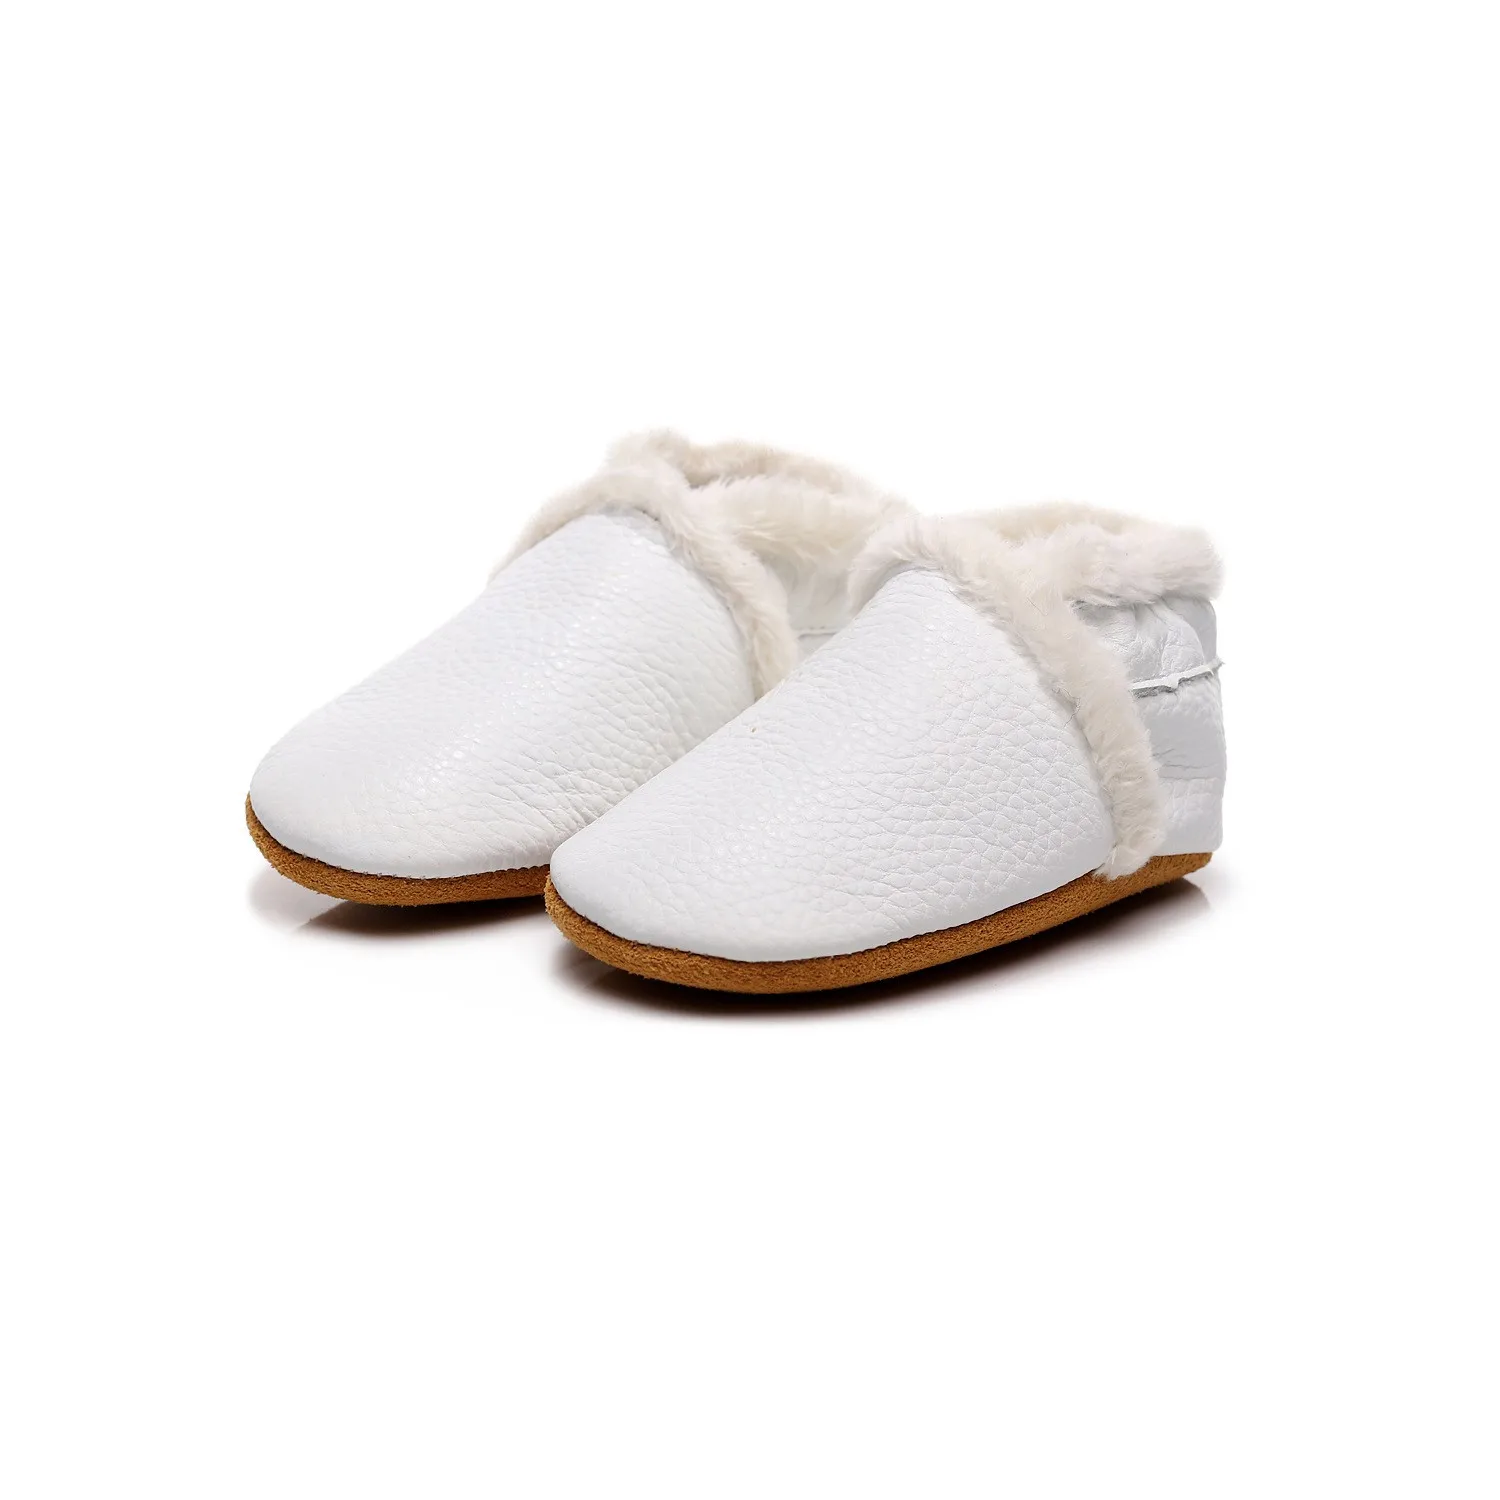 winter baby shoes 18